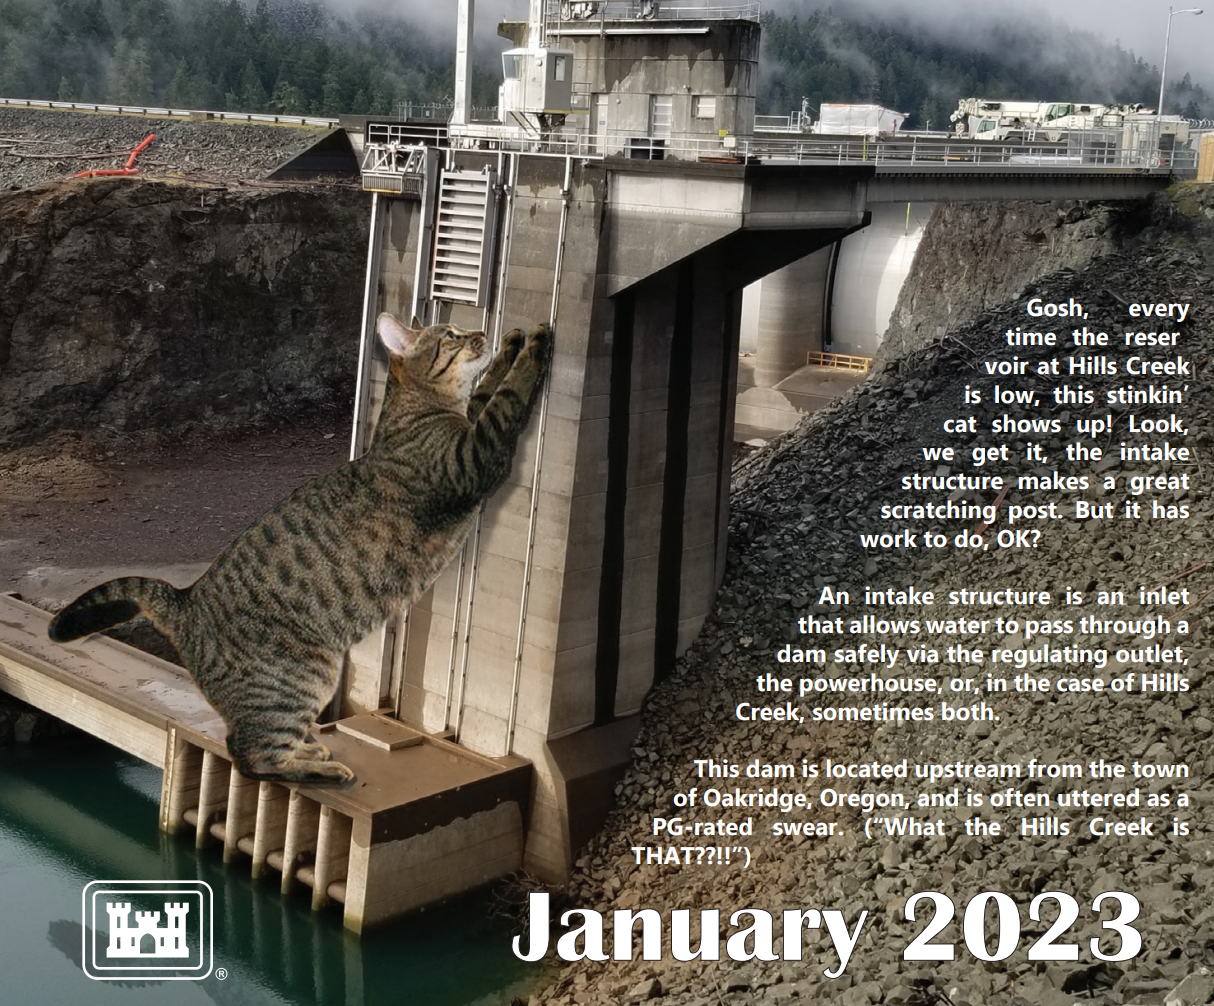 The Army Corps of Engineers made a Cat Calendar.